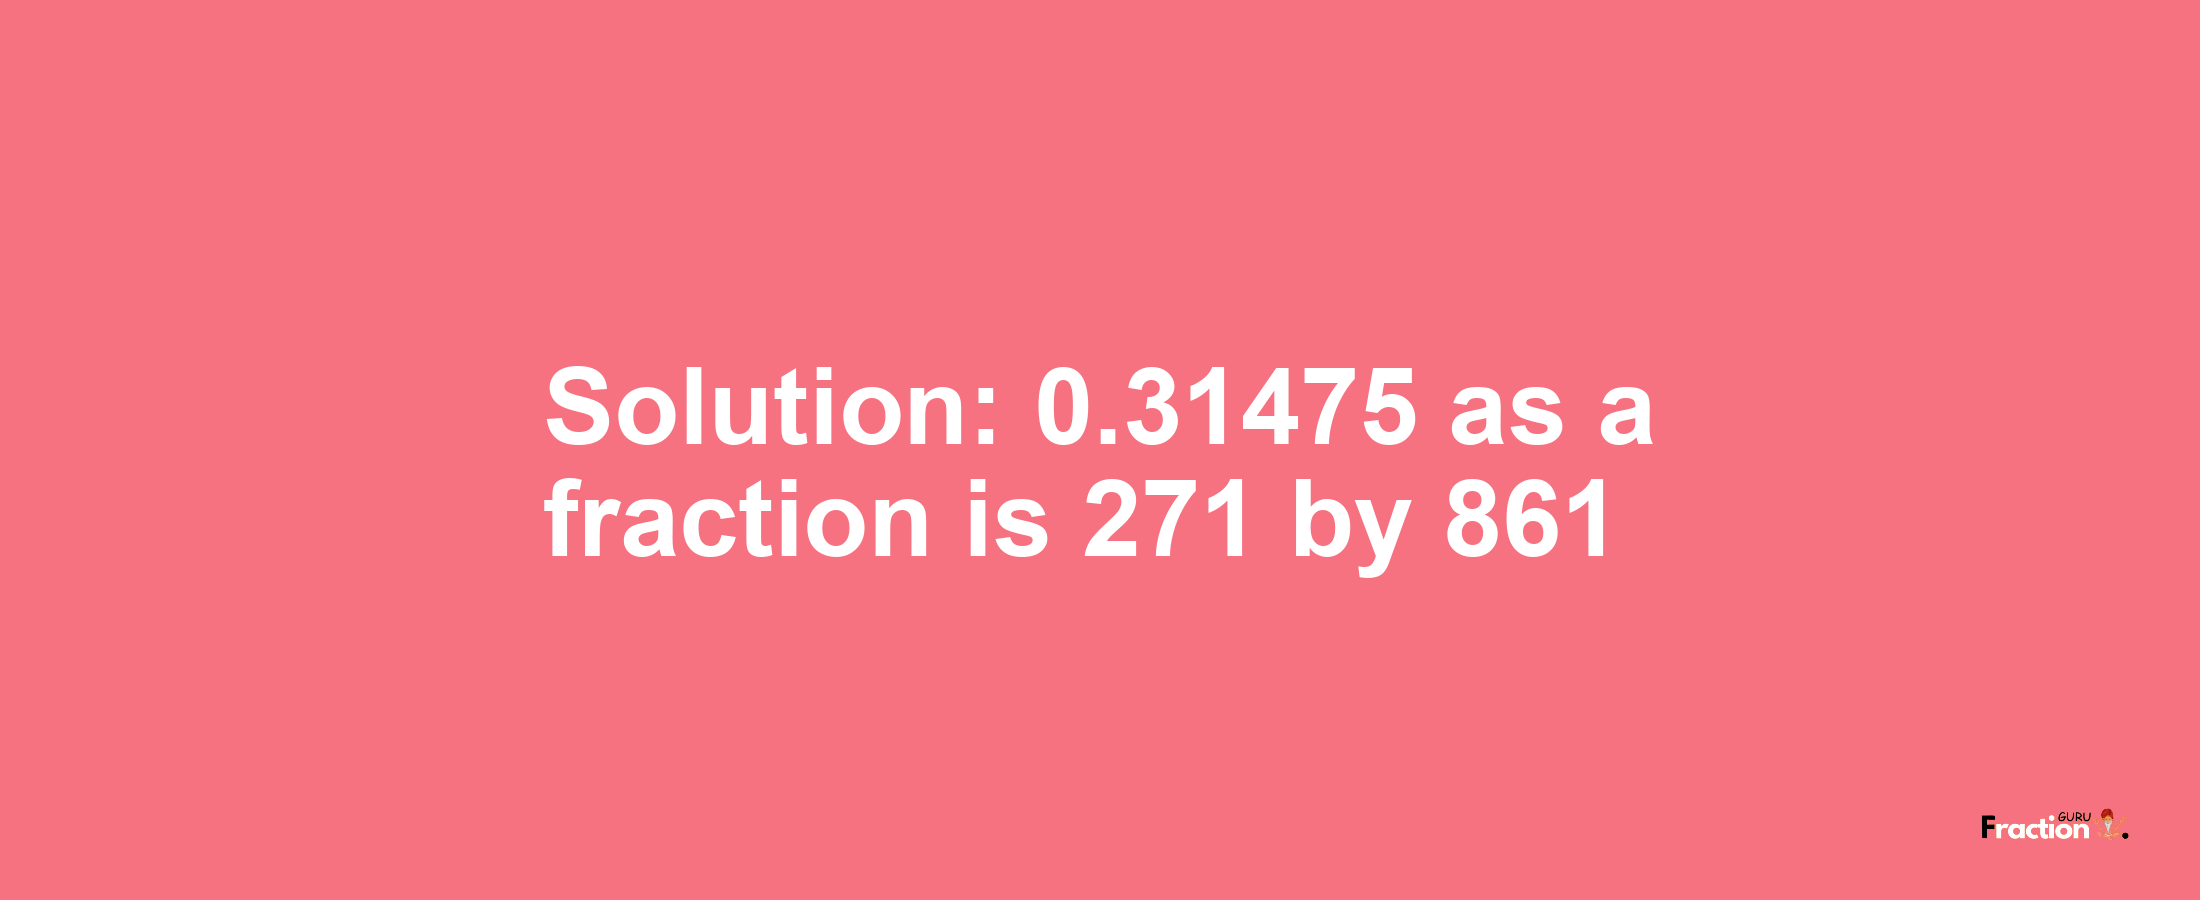 Solution:0.31475 as a fraction is 271/861